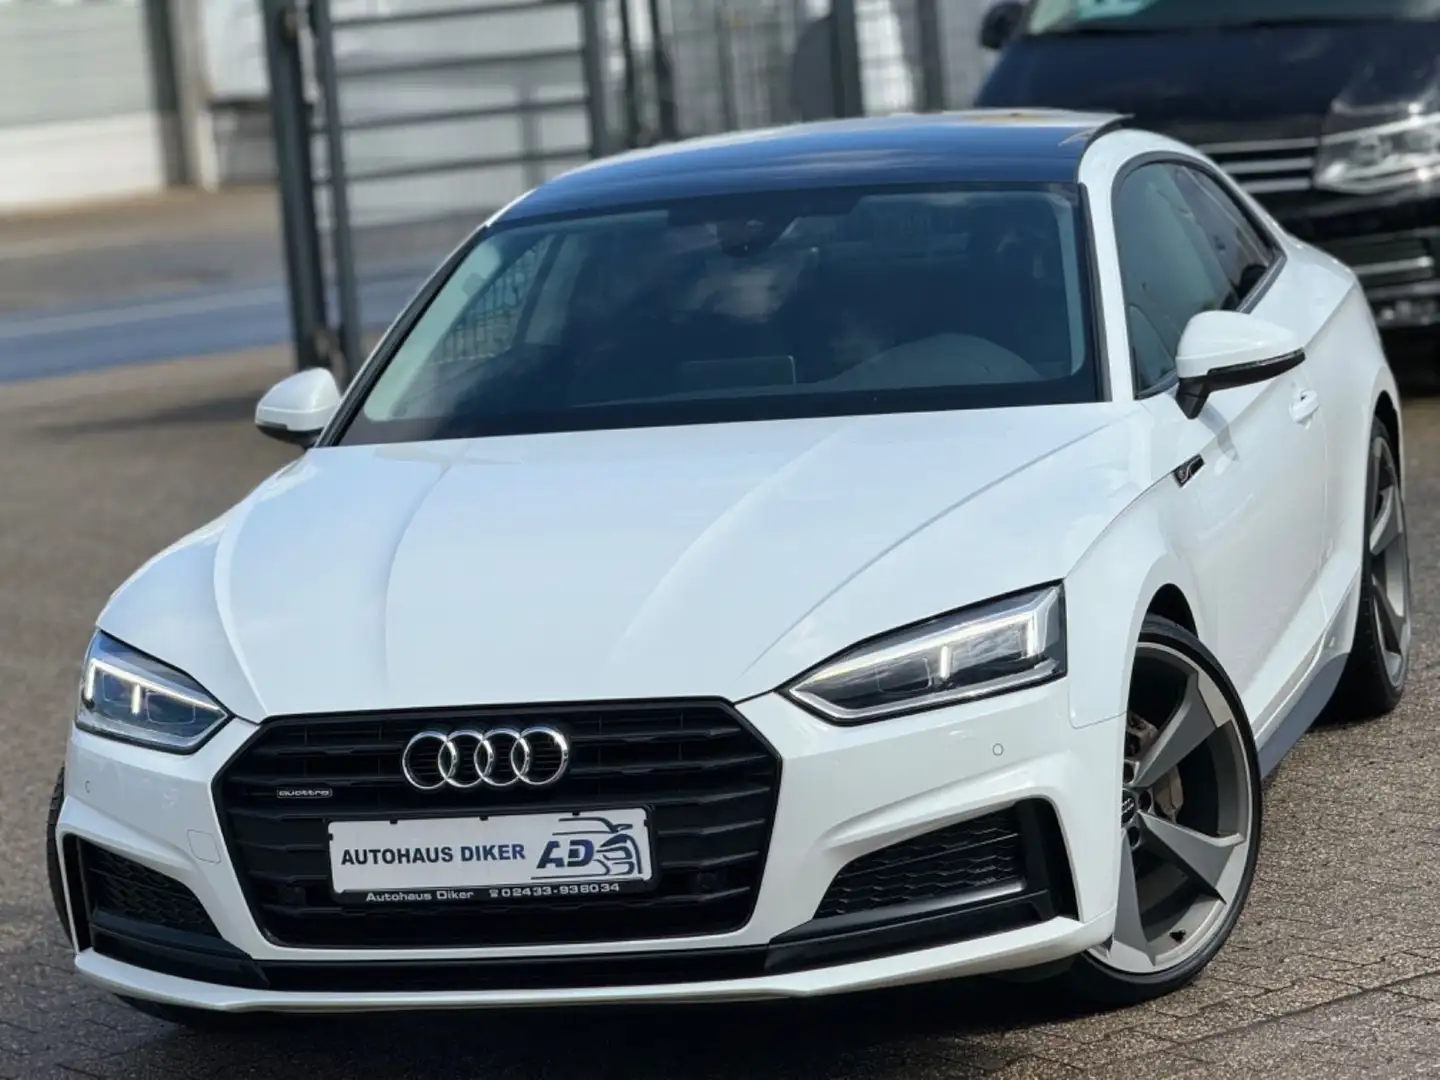 Audi A5 Coupe 2.0 TDI quattro S line Pano, 20"Rotor Weiß - 1